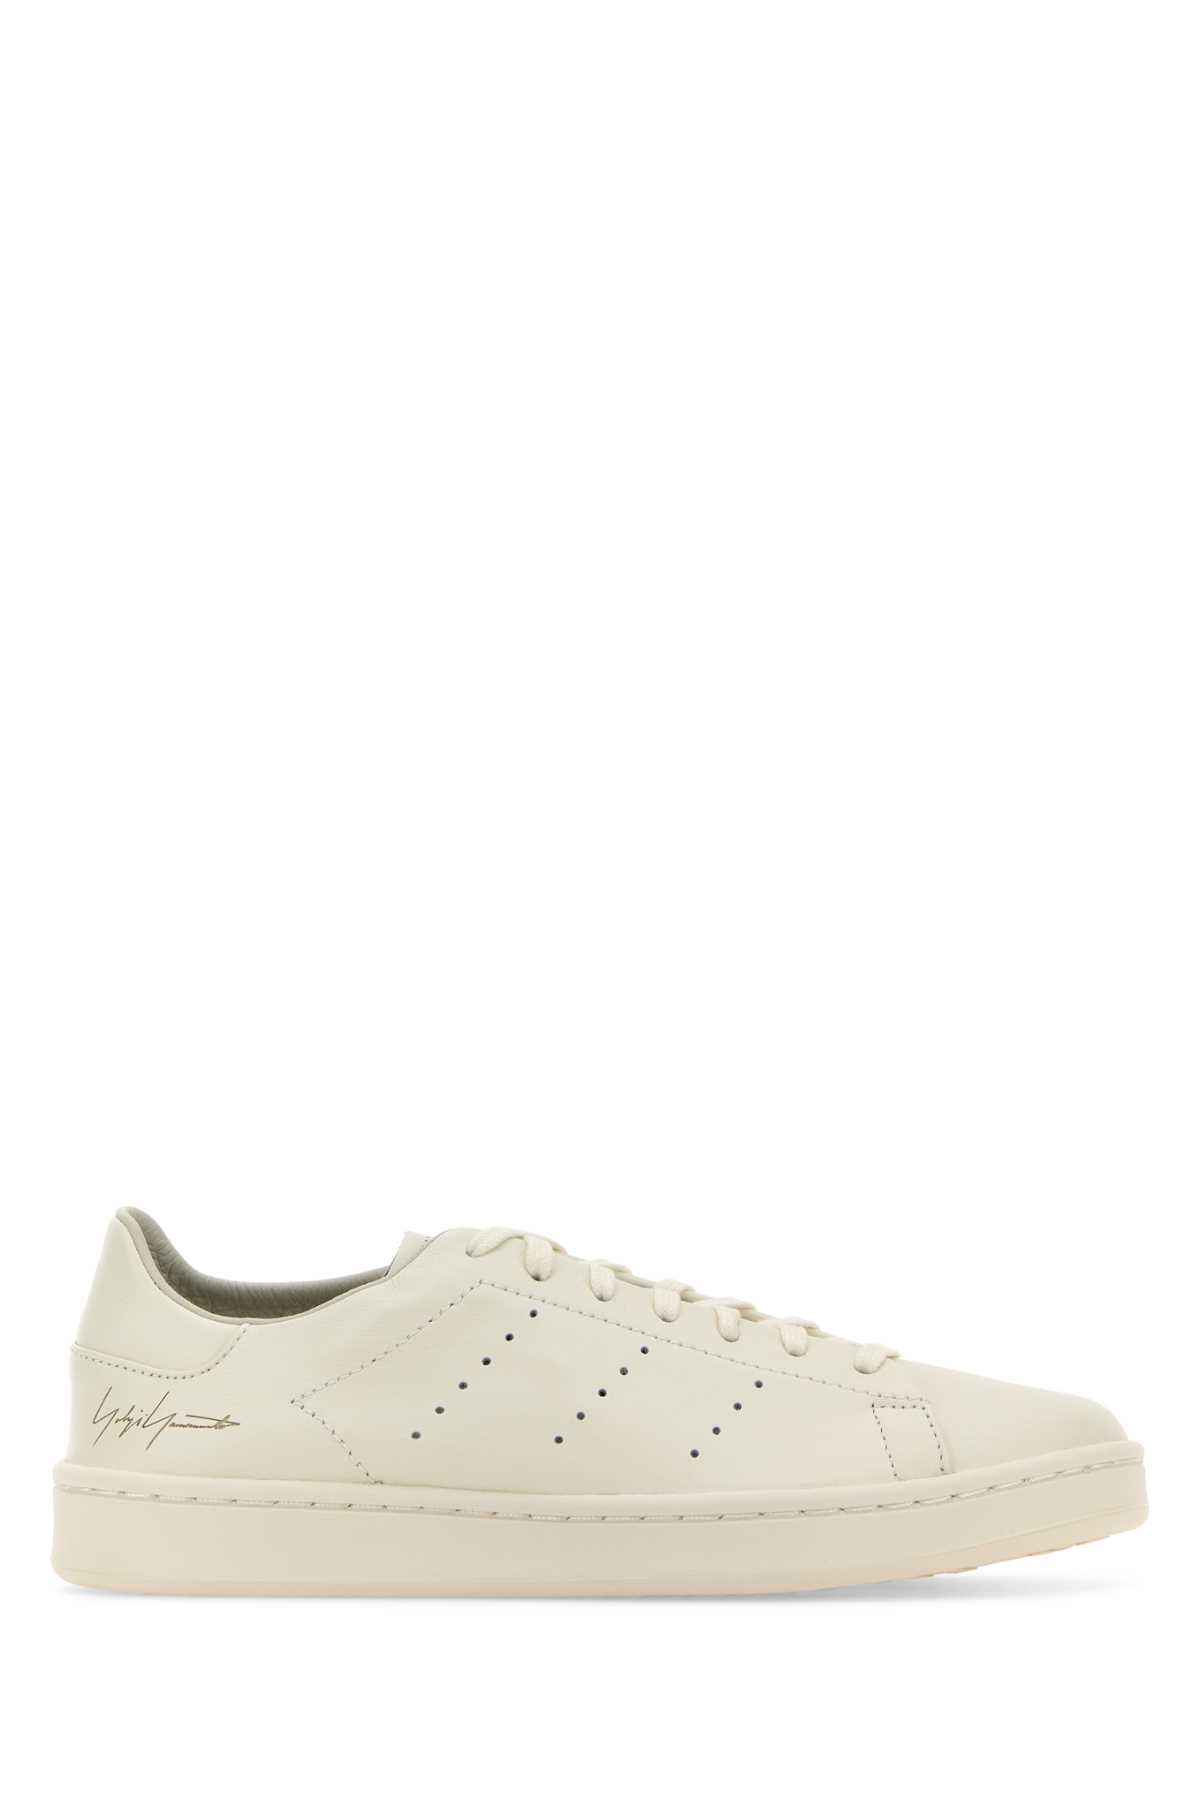 White Leather Y-3 Stan Smith Sneakers